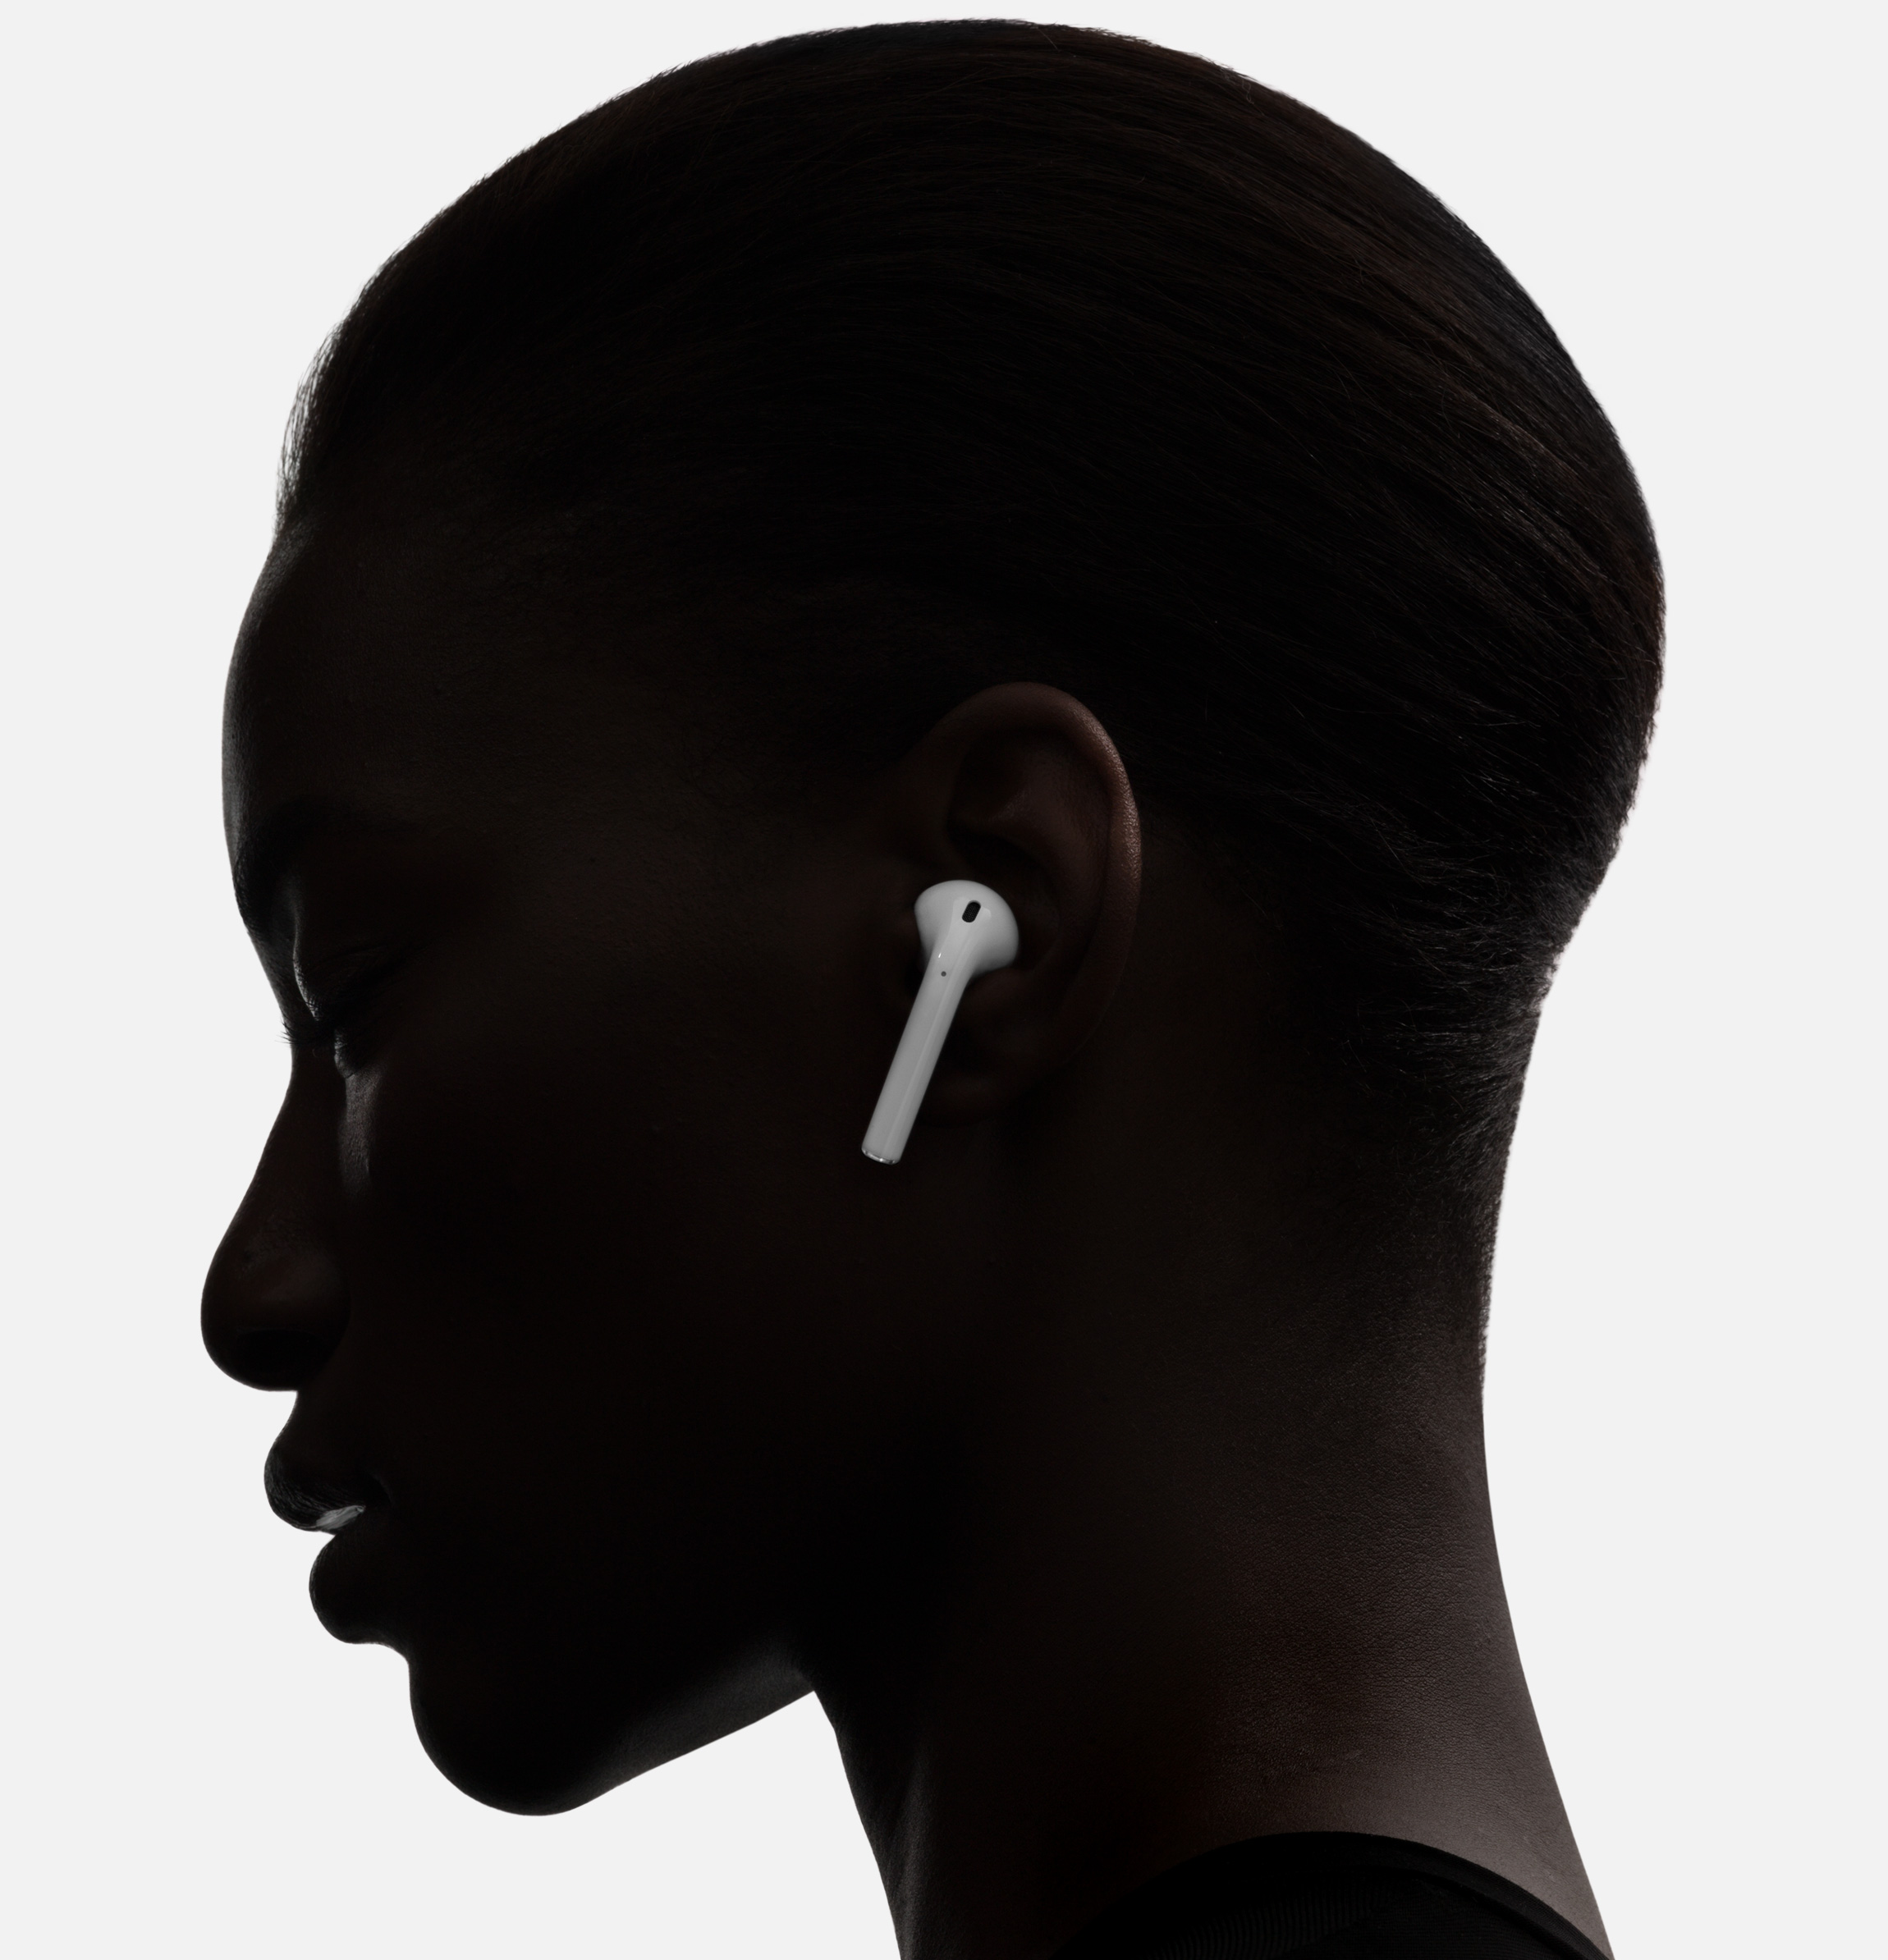 Apple’s New AirPods Are Just Gonna Get Lost